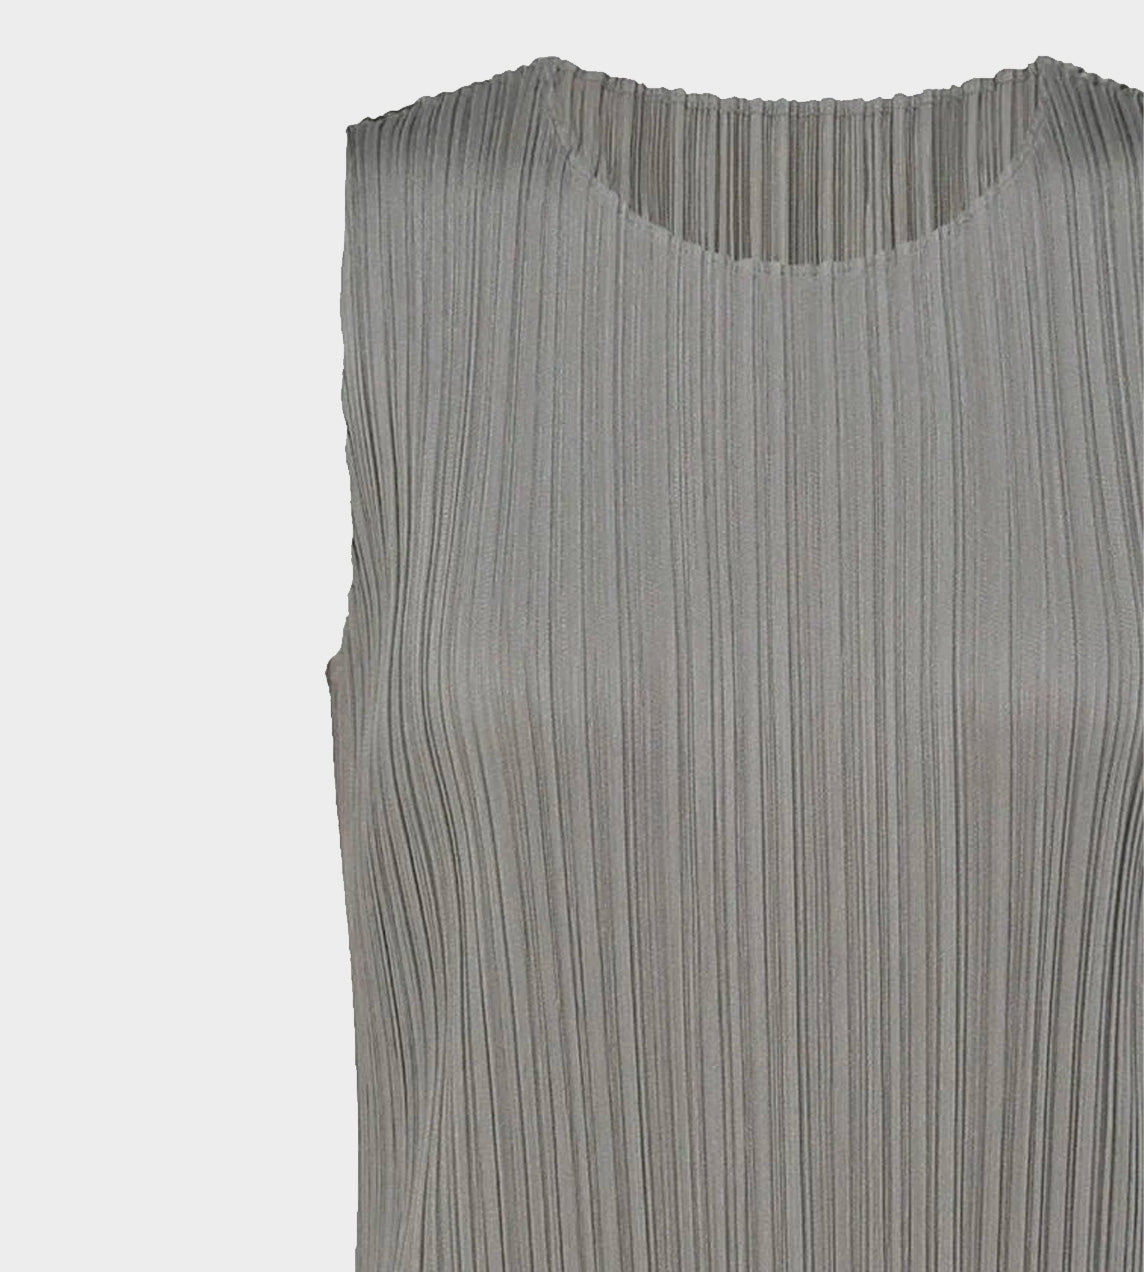 Pleats Please Issey Miyake - Basic Fitted Dress Grey